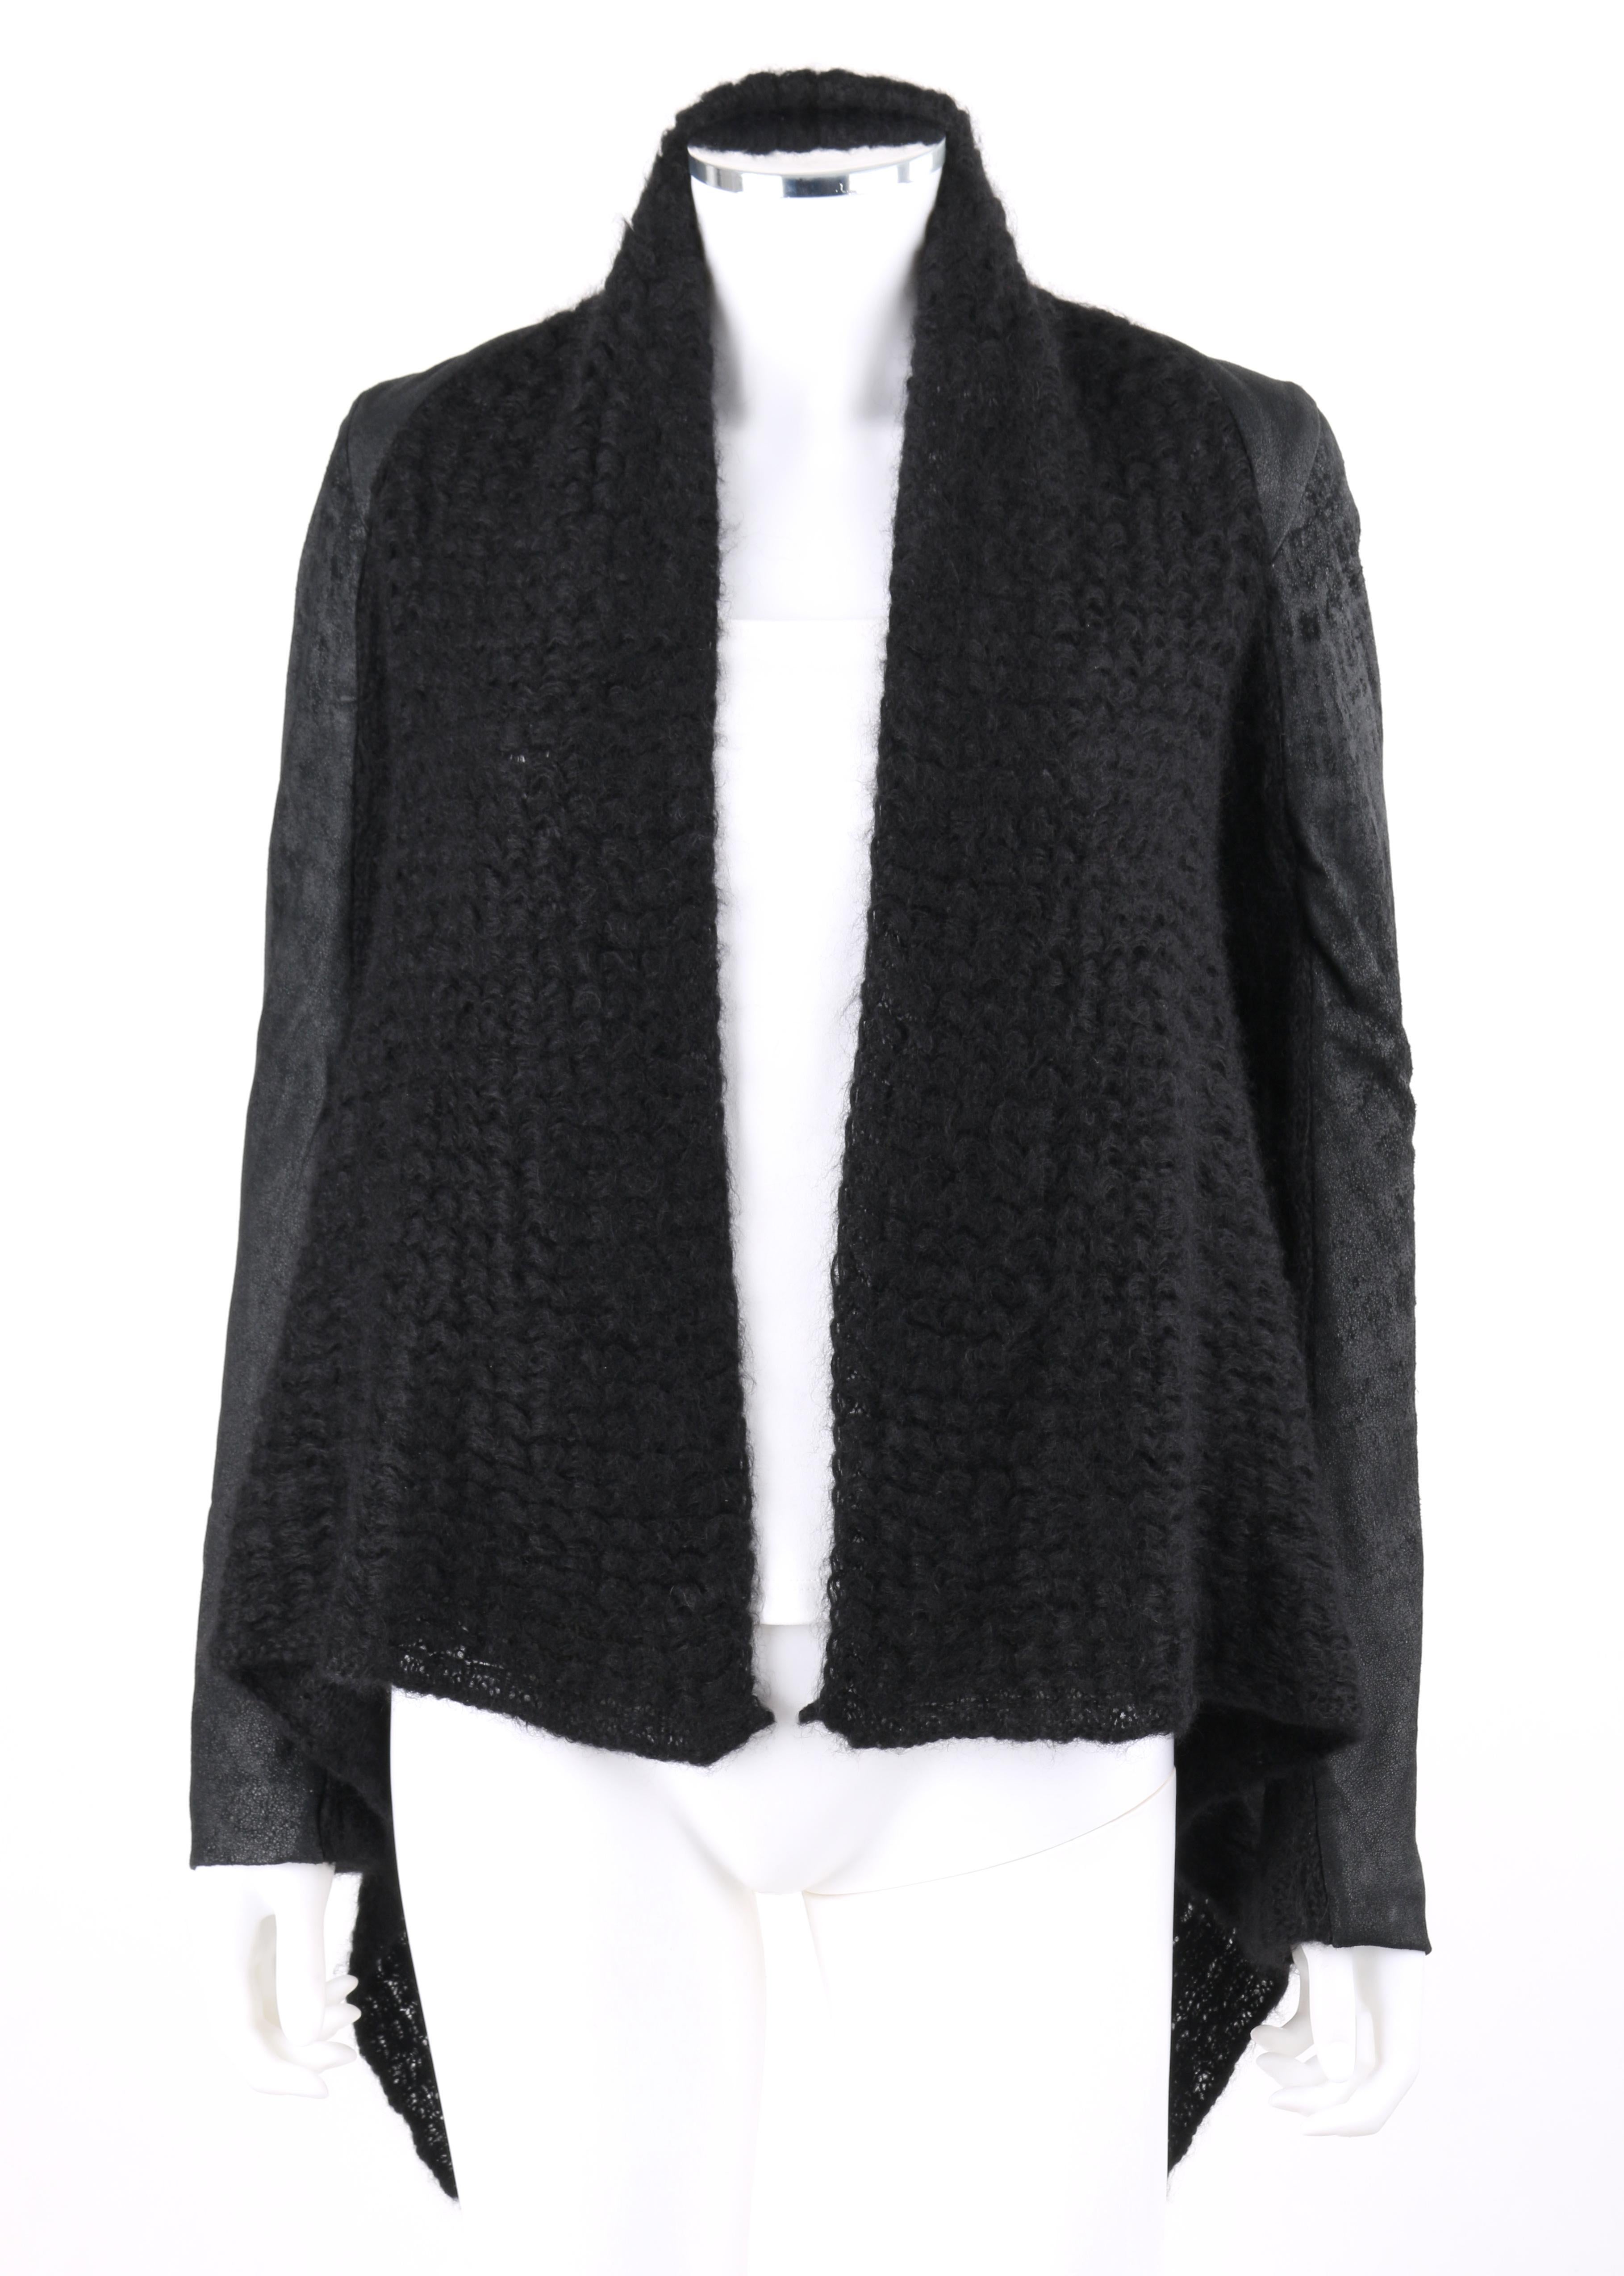 IKRAM RICK OWENS Black Open Waterfall Cardigan Leather Insets Mohair Sweater 

Label(s): IKRAM; Rick Owens signature on tag
Style: Open Front Waterfall Cardigan
Color(s): Black
Lined: No
Marked Fabric Content: 58% Mohair; 37% Nylon; 5%